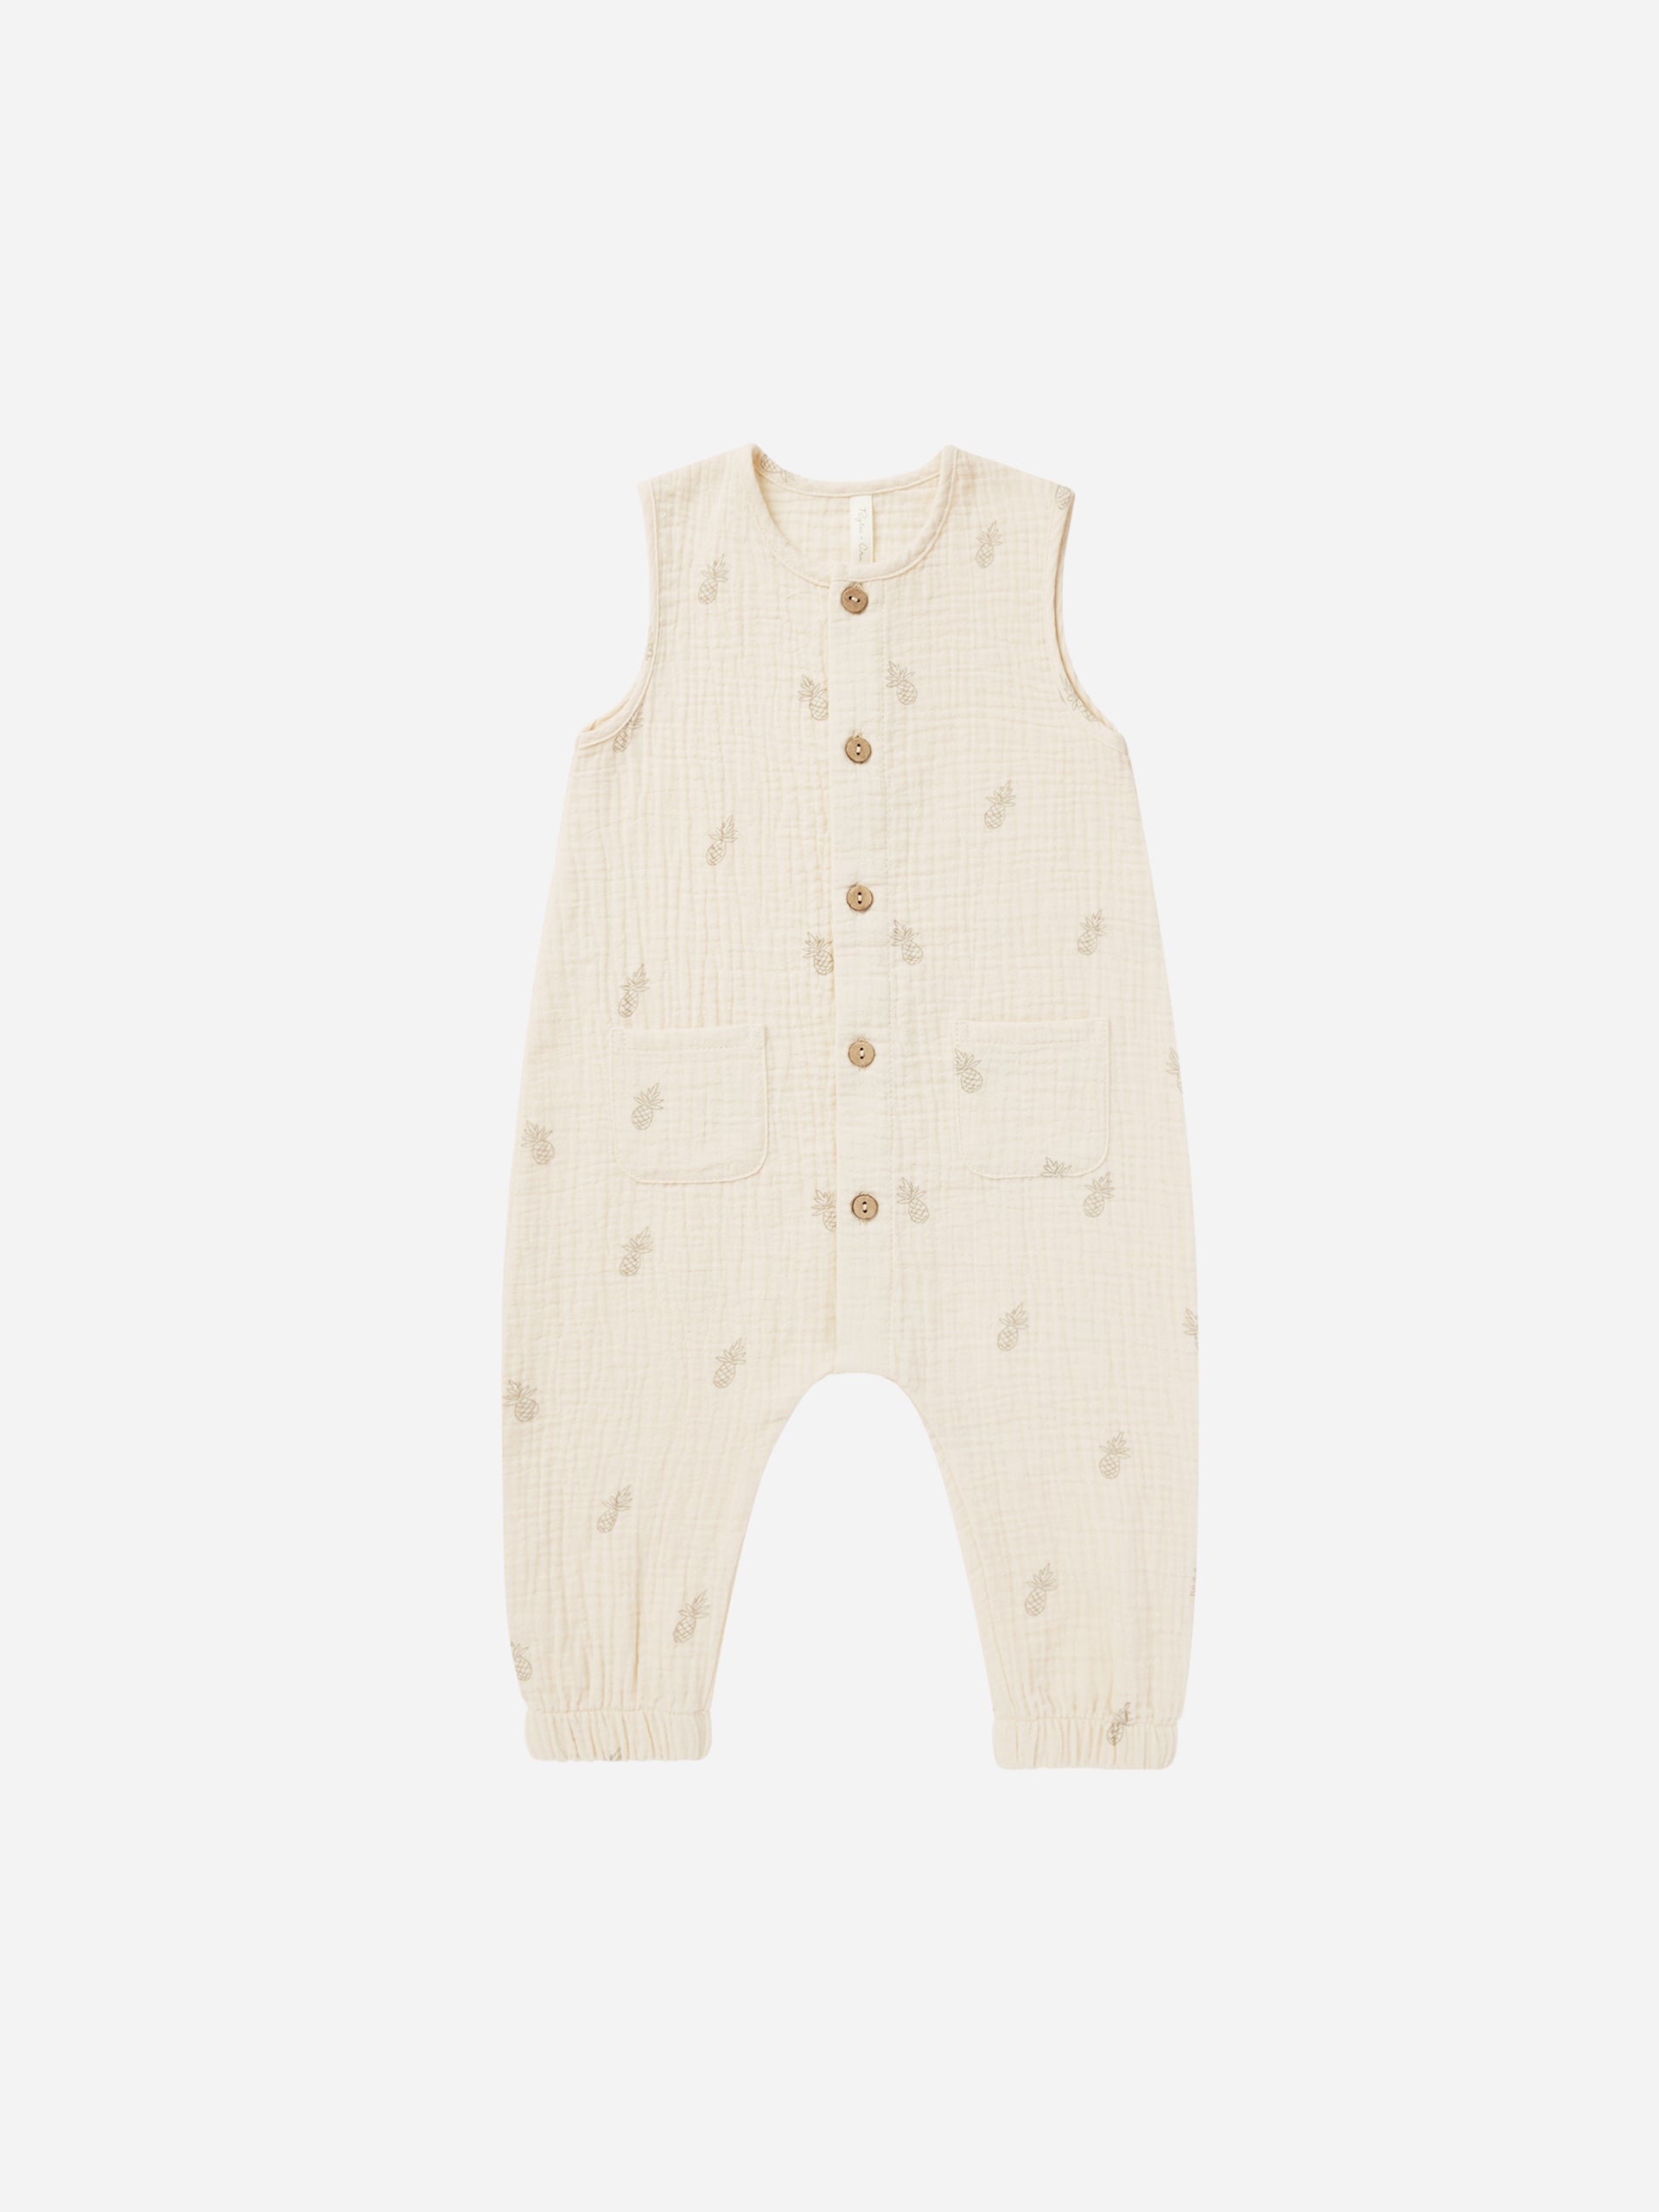 Woven Jumpsuit || Pineapple - Rylee + Cru | Kids Clothes | Trendy Baby Clothes | Modern Infant Outfits |